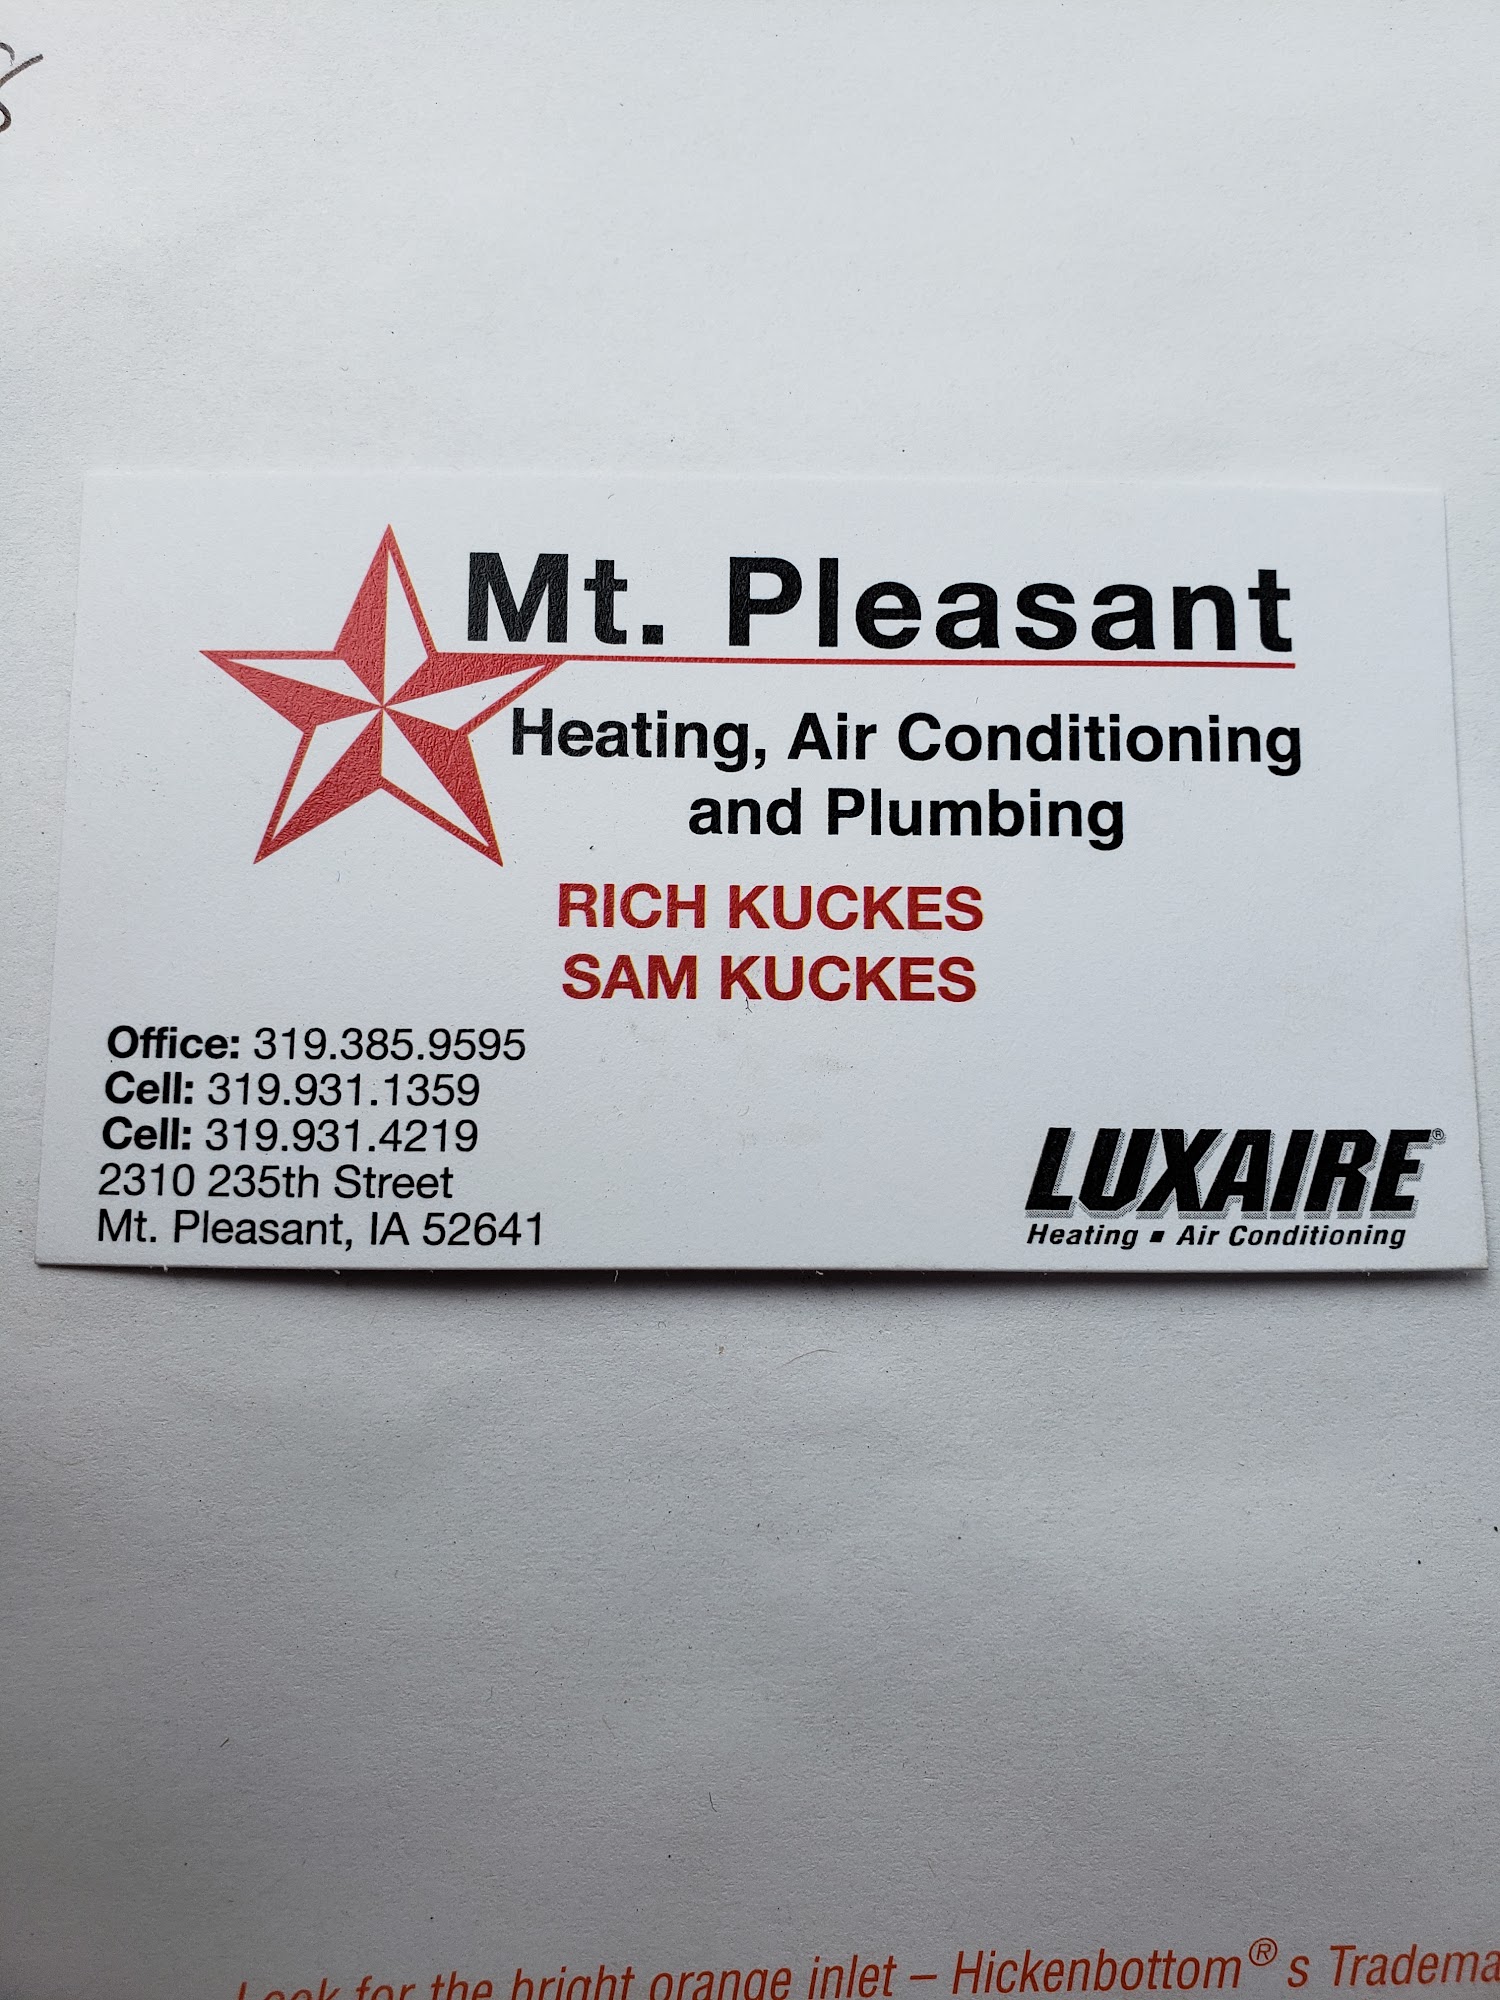 Mt Pleasant Heating Air Conditioning and plumbing.